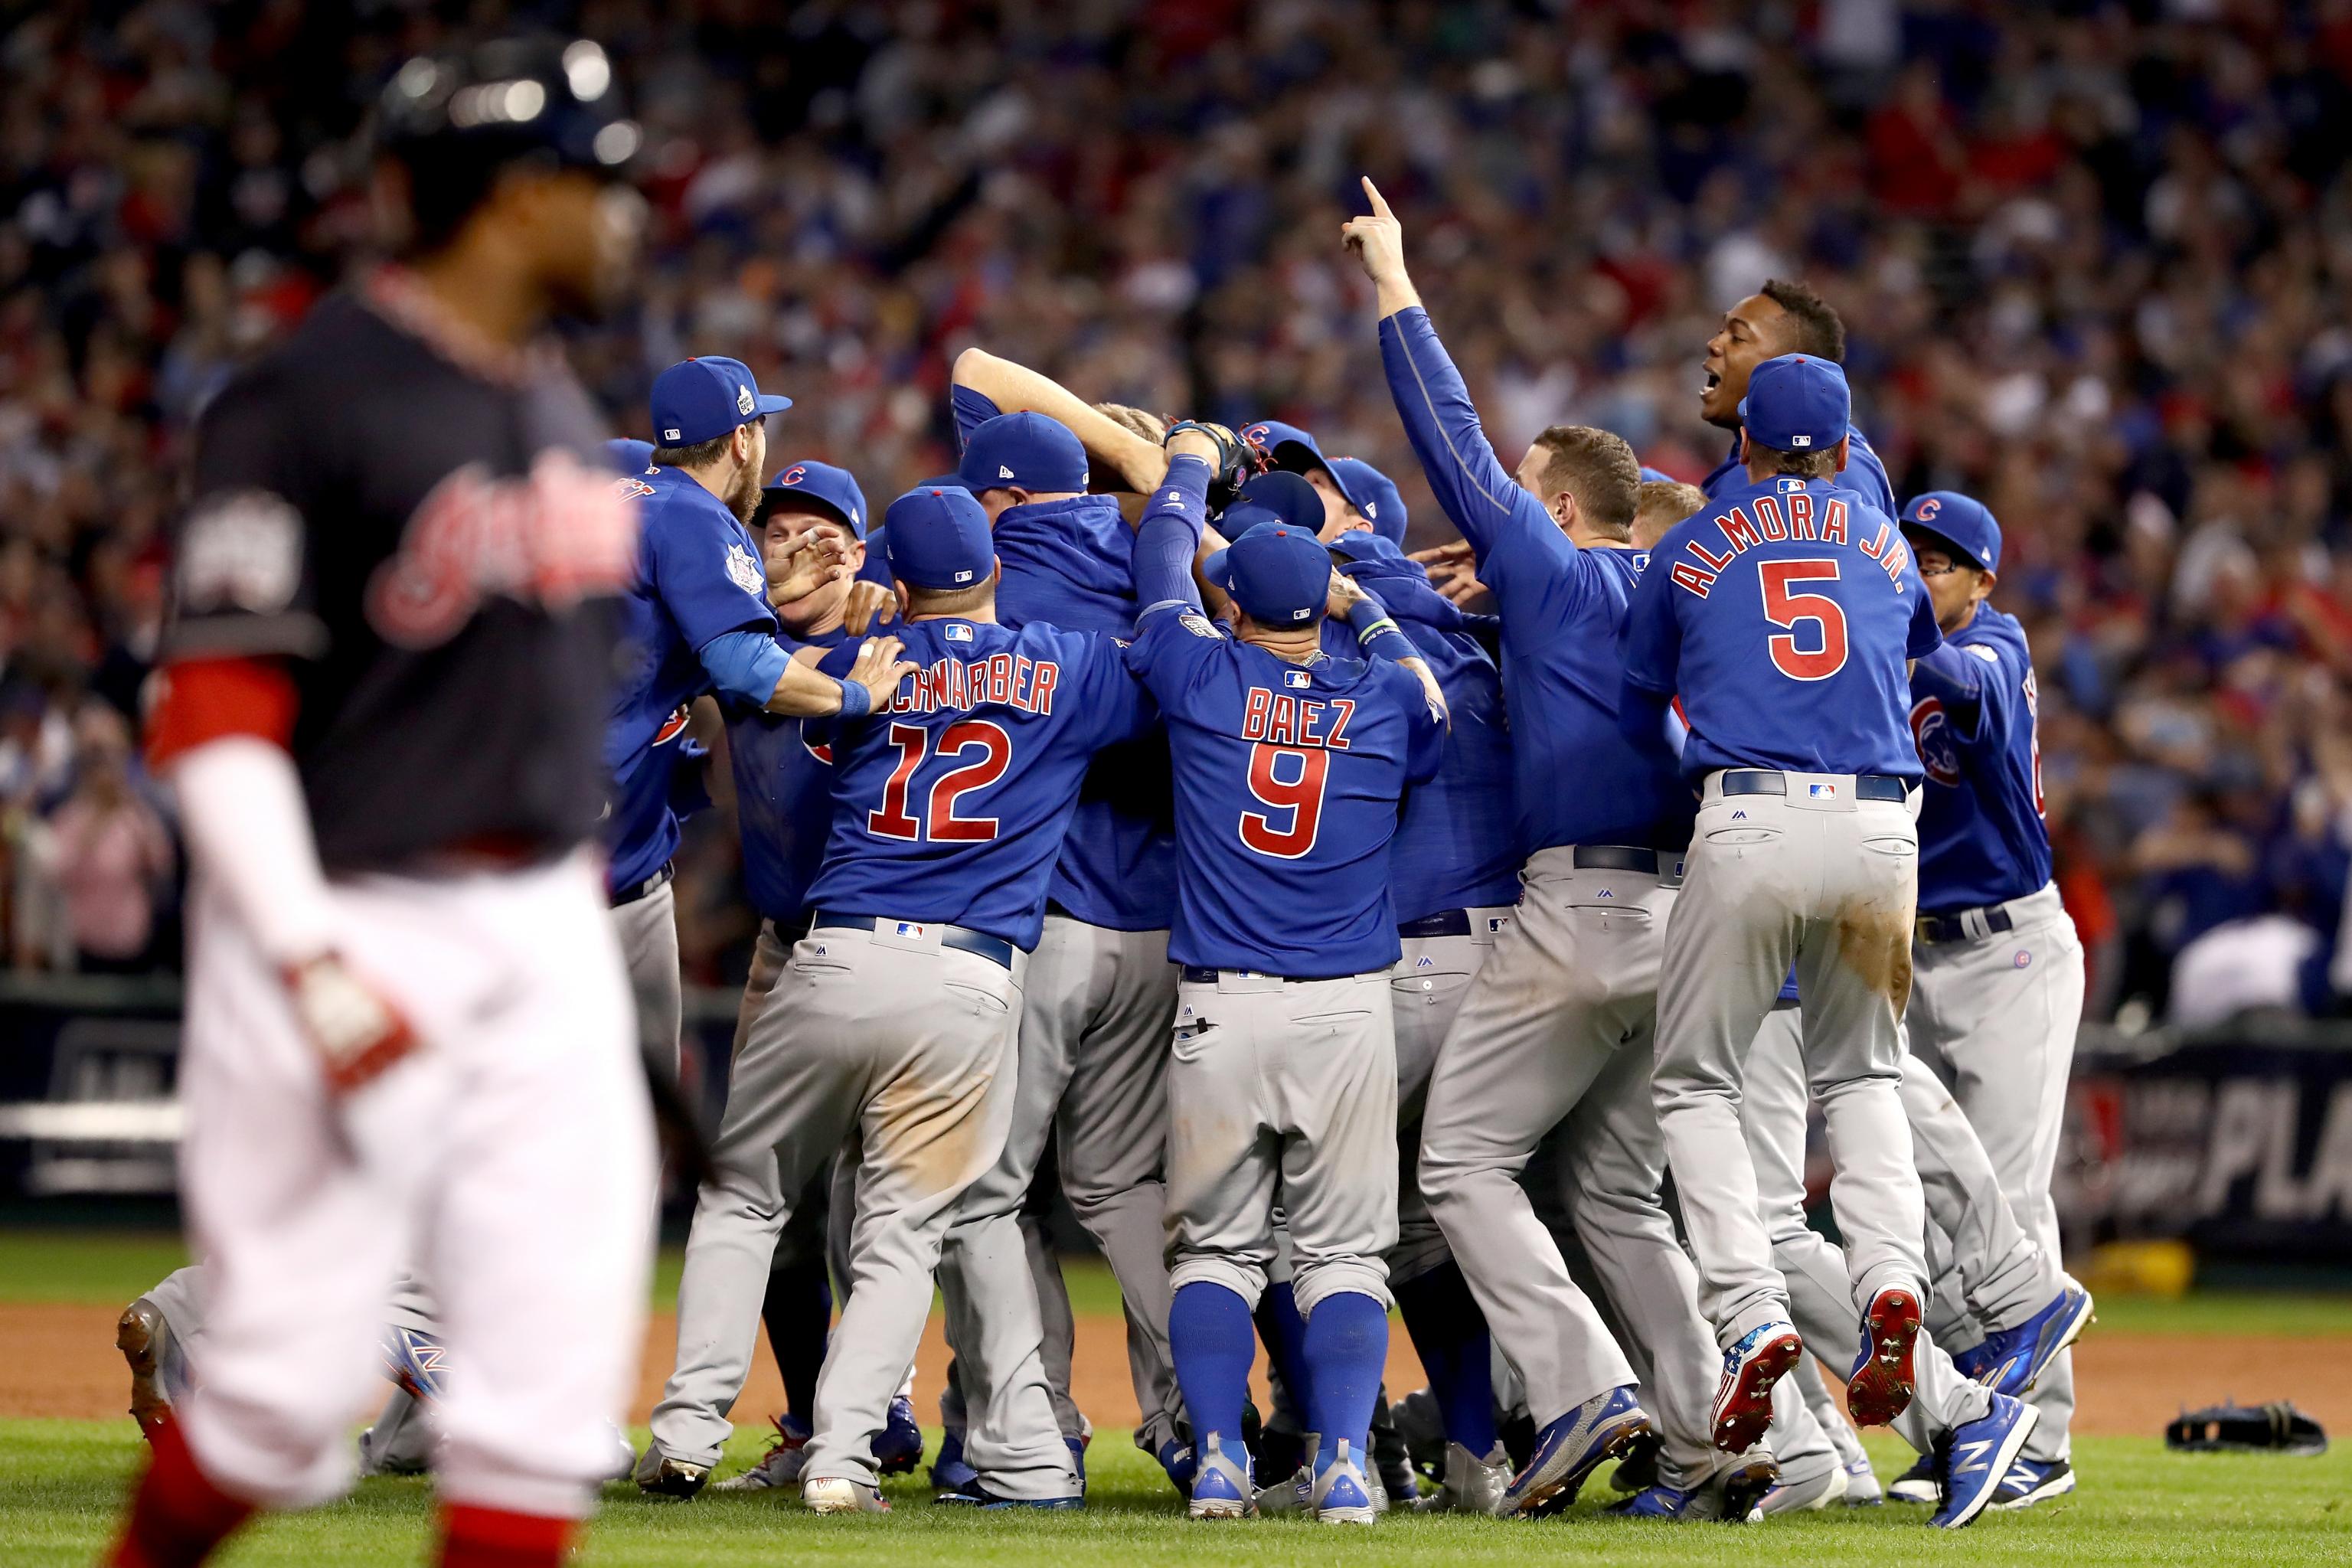 2016 World Series Game 7 (Cubs win World Series for first time in